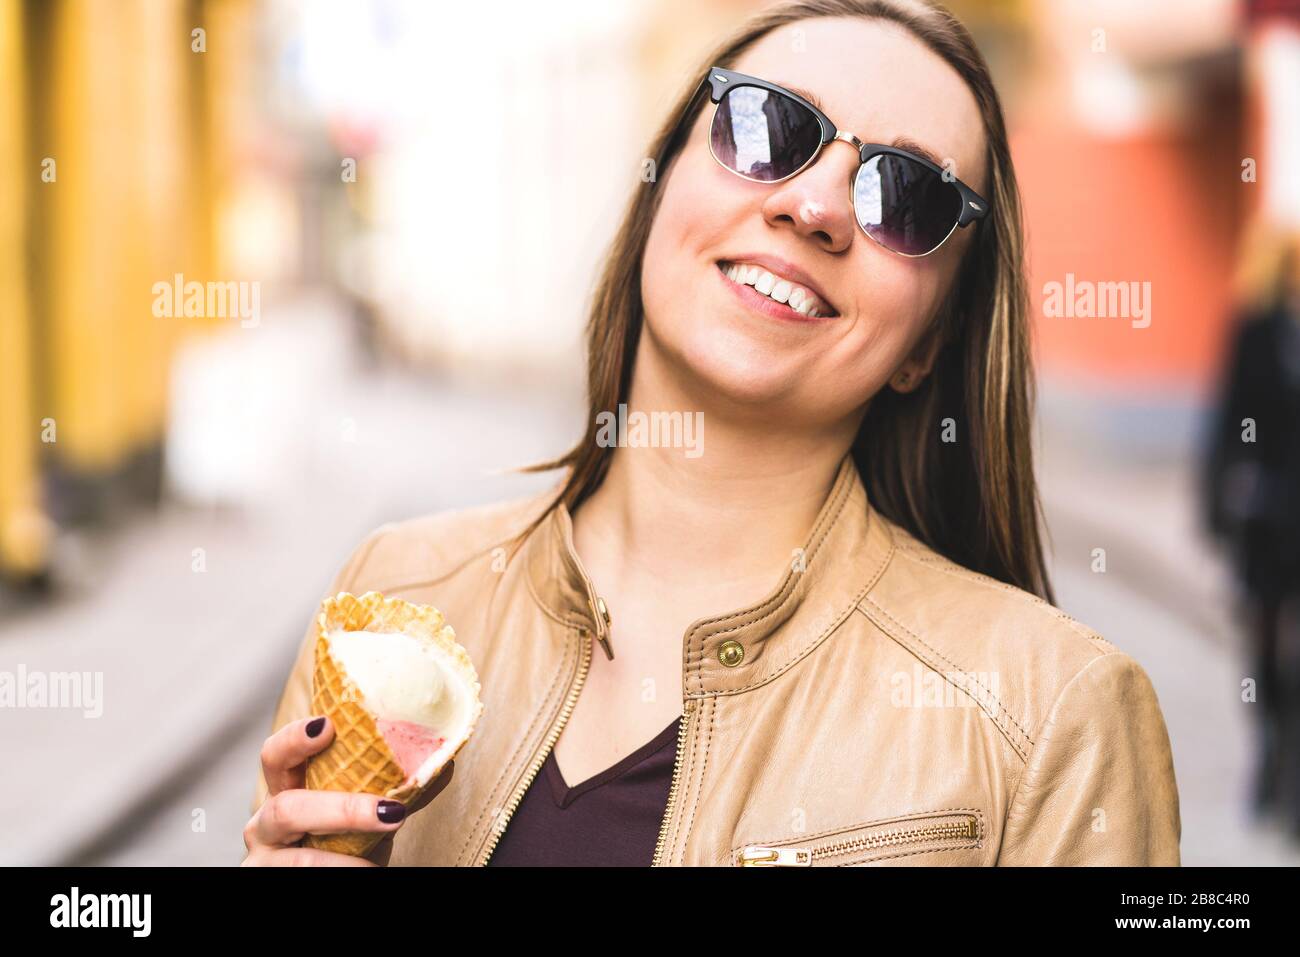 Woman with melted ice cream on nose. Happy smiling person eating melting icecream in the city. Messy face. Stock Photo